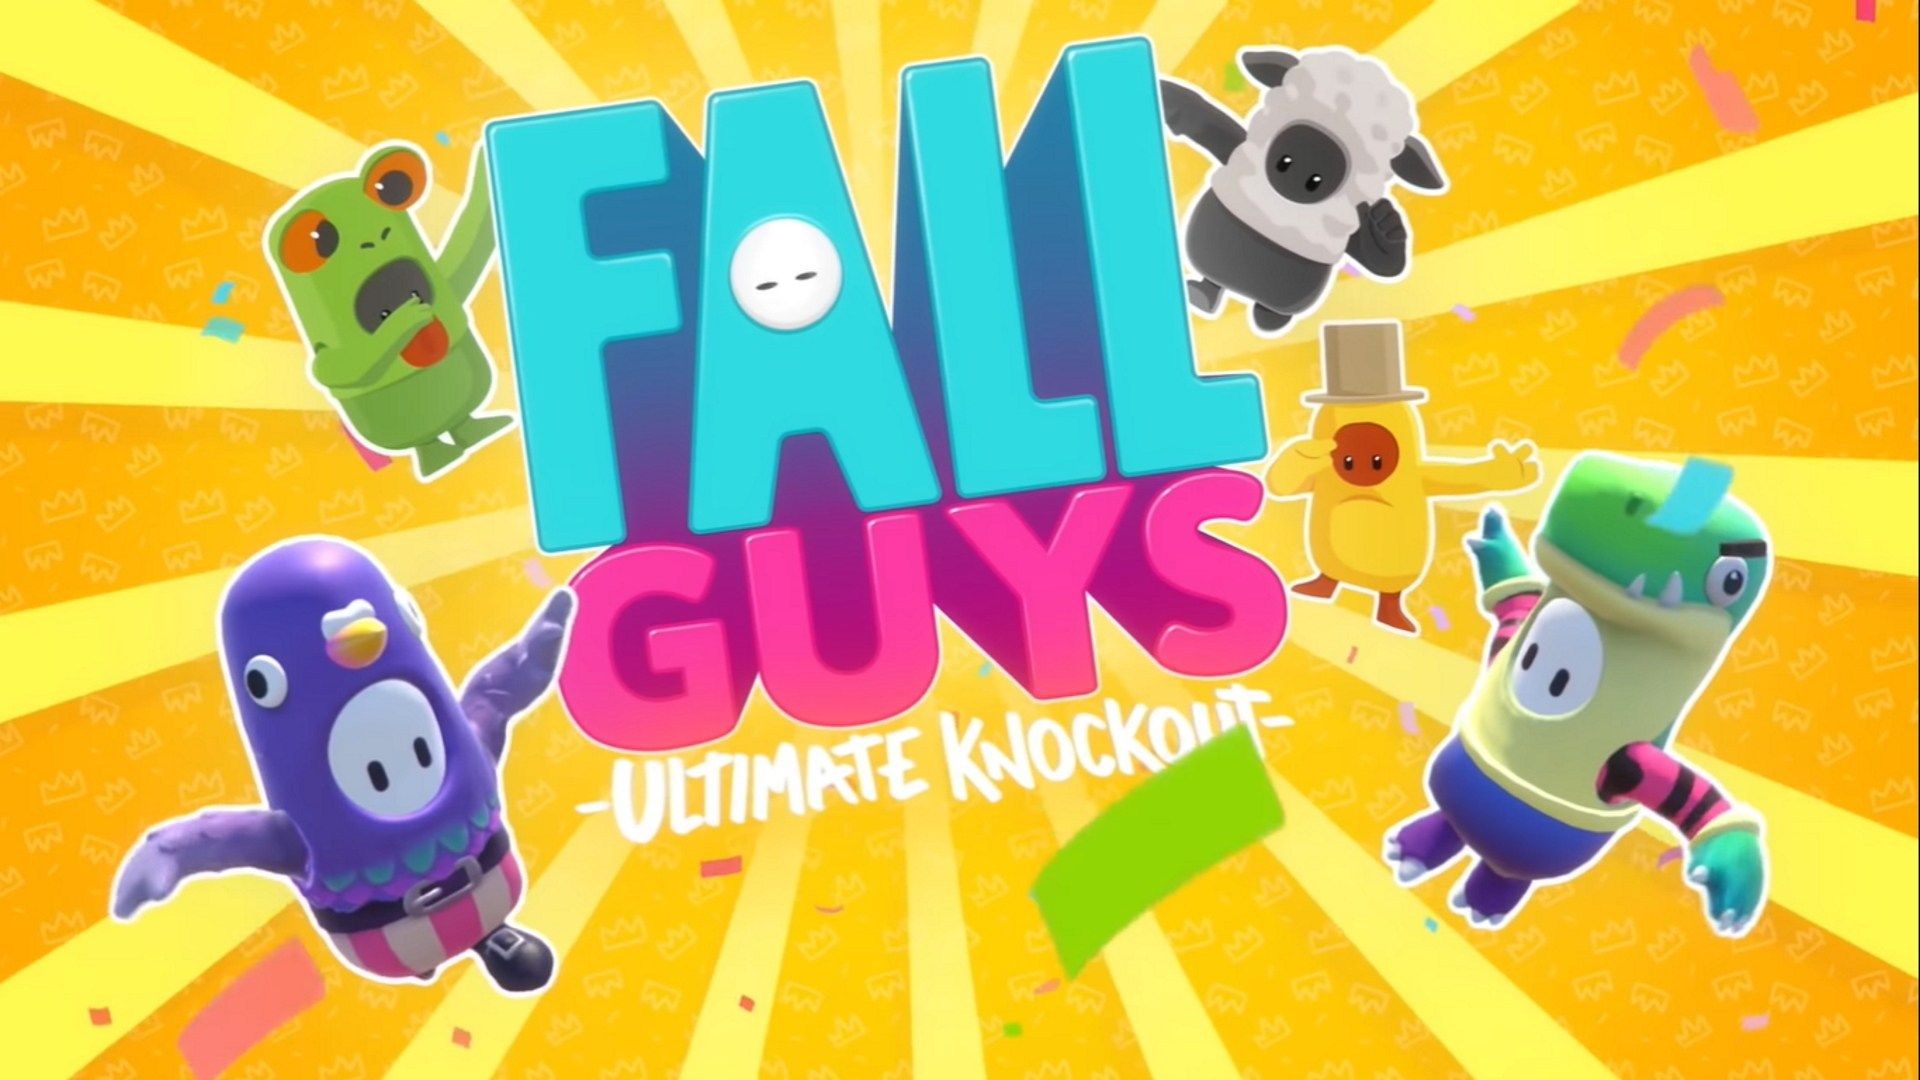 A new beta falls upon us, Fall Guys comes to the Playstation 4